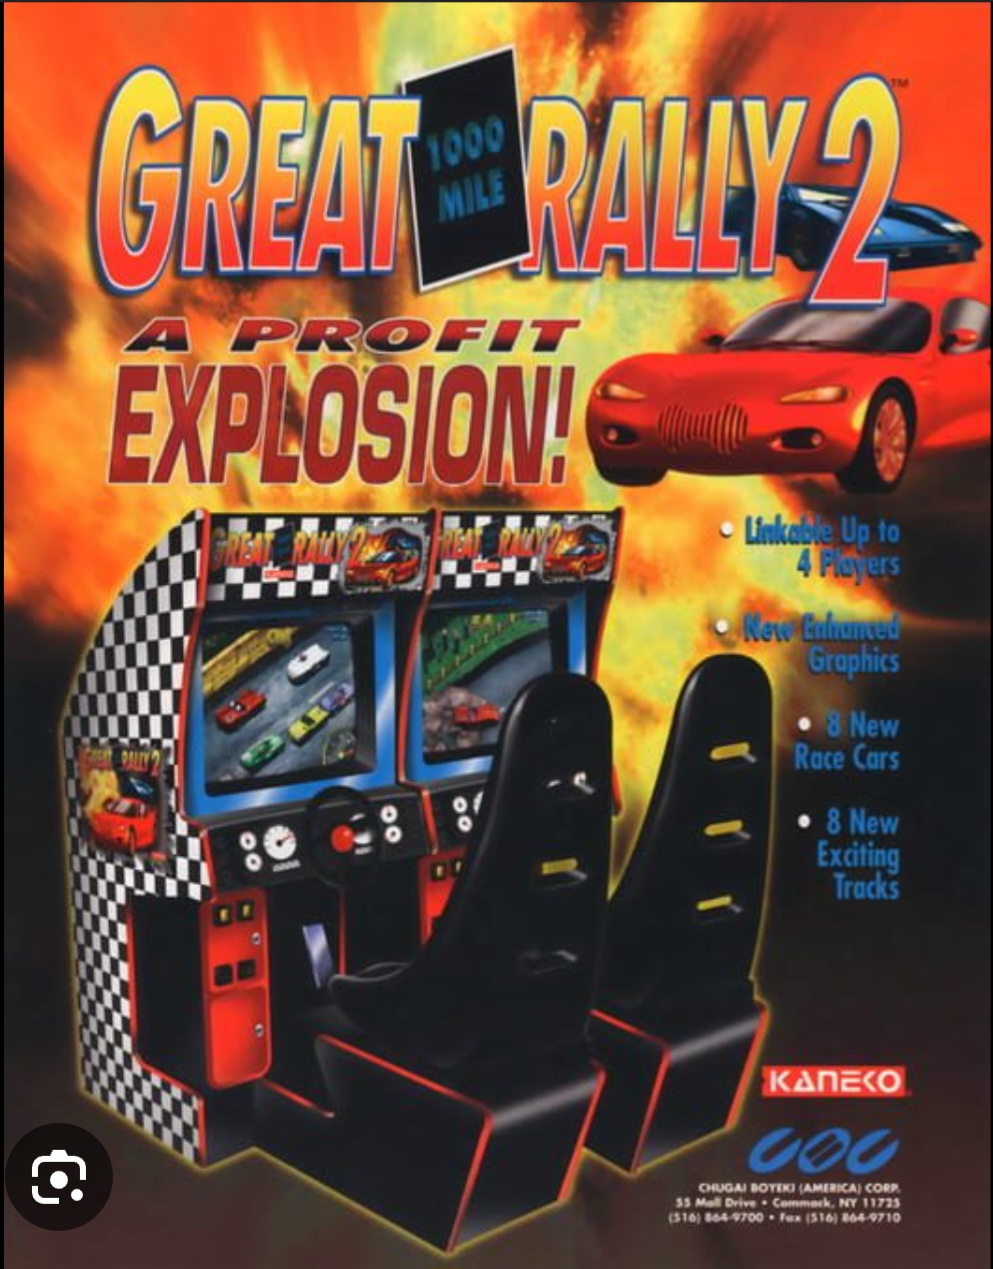 The Great 1000 Mile Rally 2 